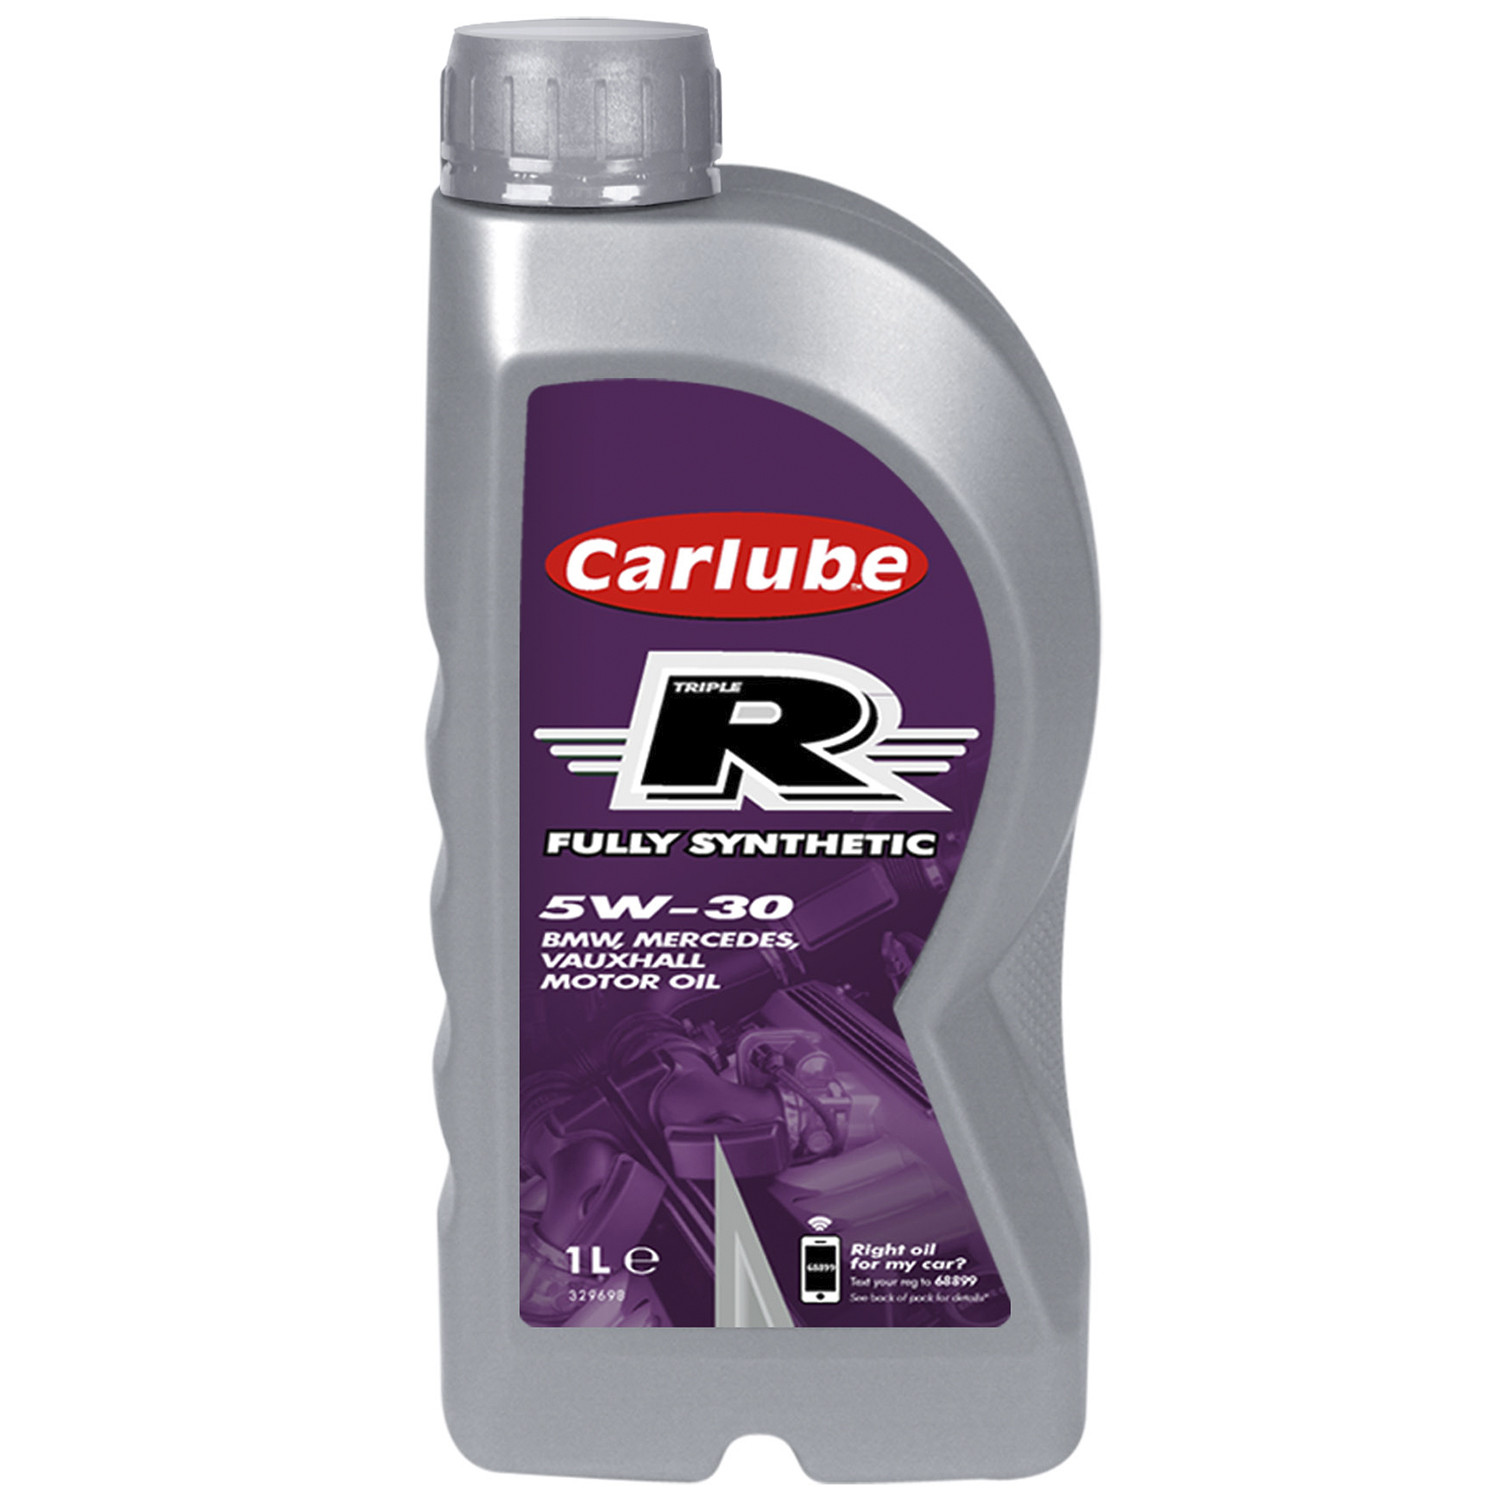 Triple R Fully Synthetic 5W30 BMW Motor Oil - 1l Image